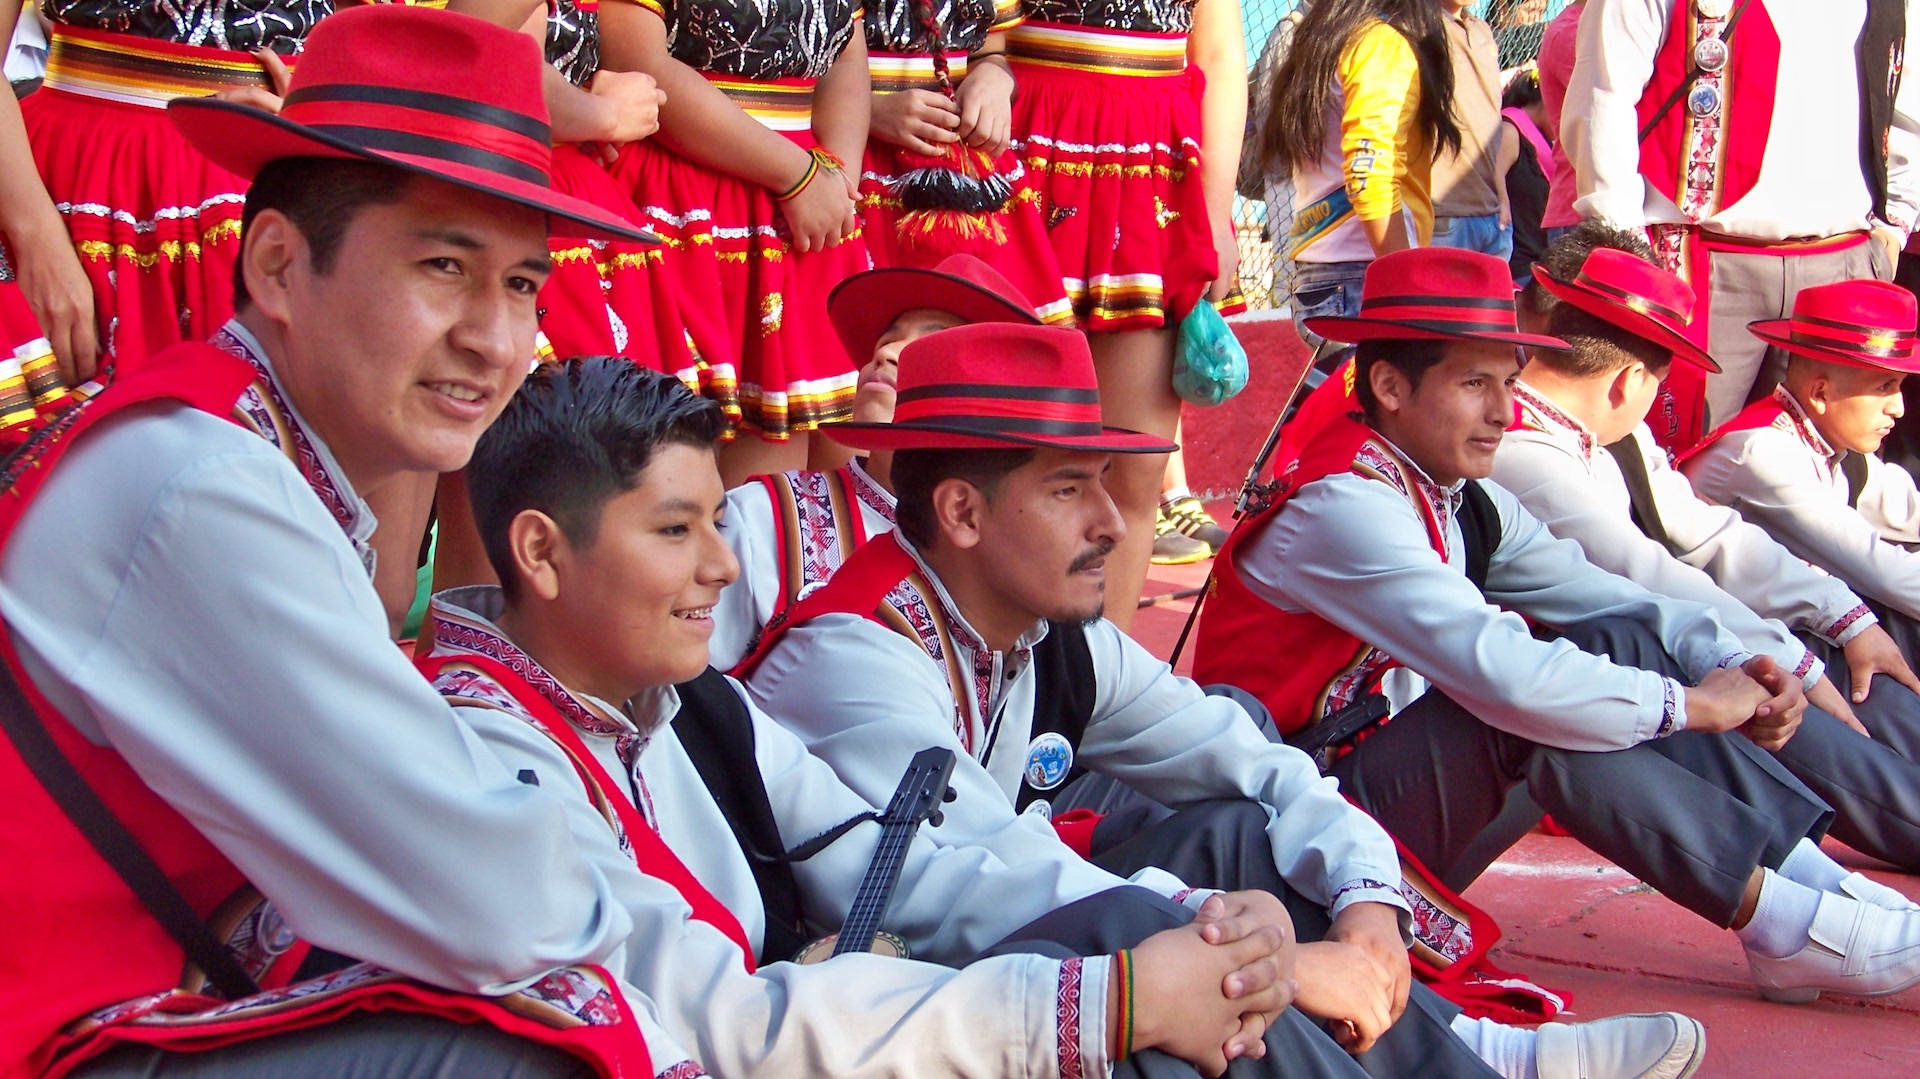 Brazil,With a large community of Bolivians in the city of Sao Paulo, immigrants hold cultural performances every month.